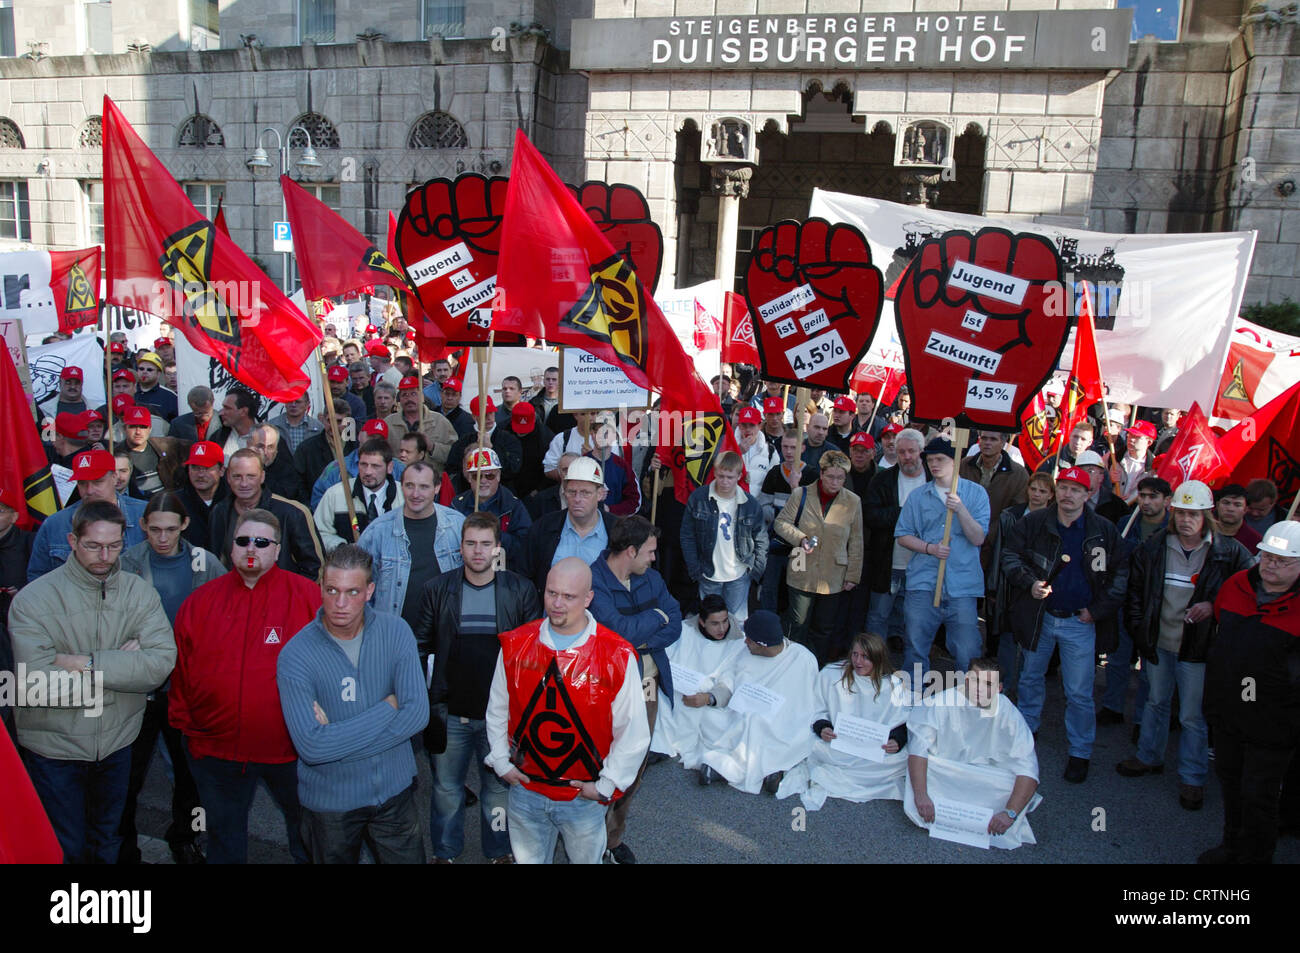 IG Metall rally in Duisburg Stock Photo